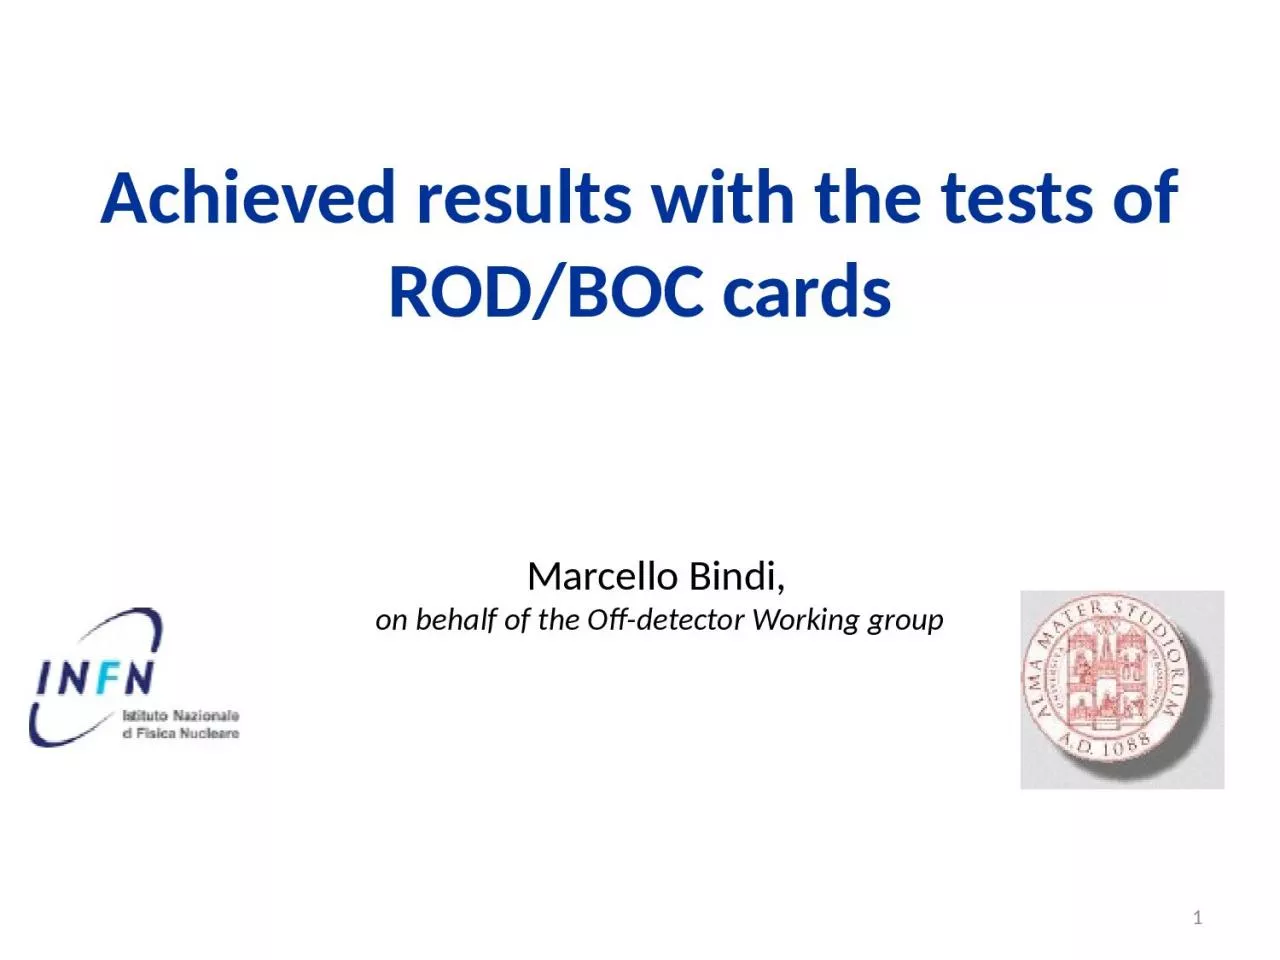 A chieved results with the tests of ROD/BOC cards